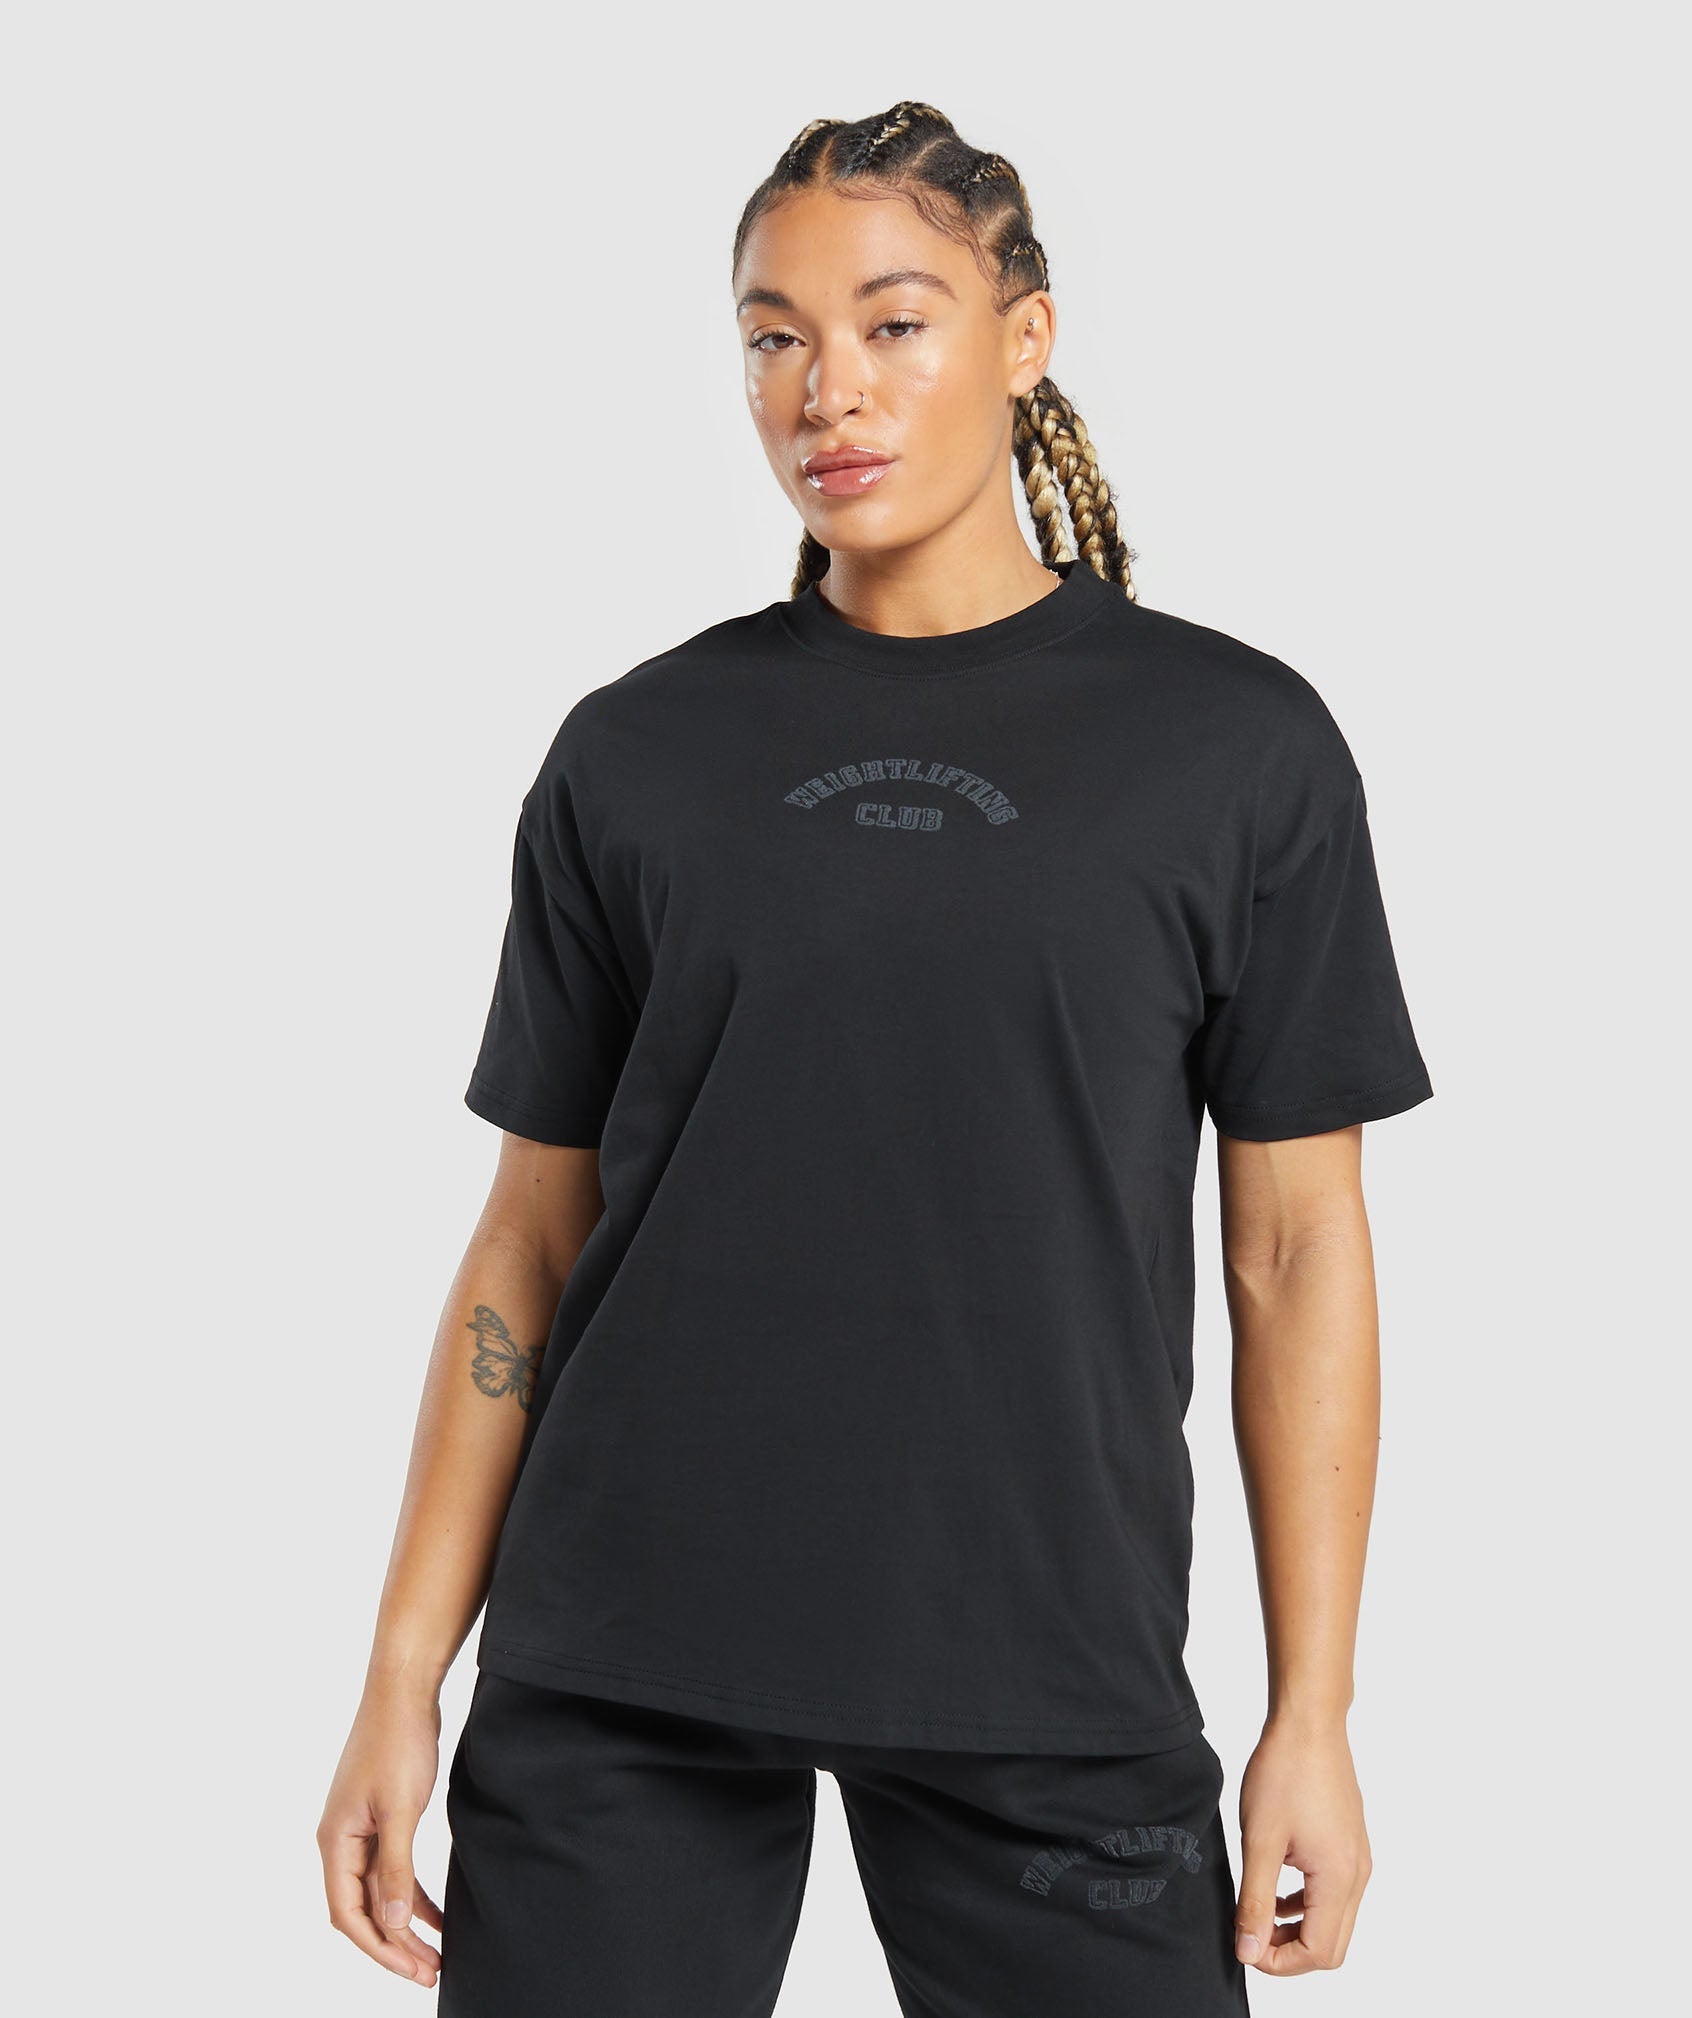 Weightlifting Oversized T-Shirt in Black